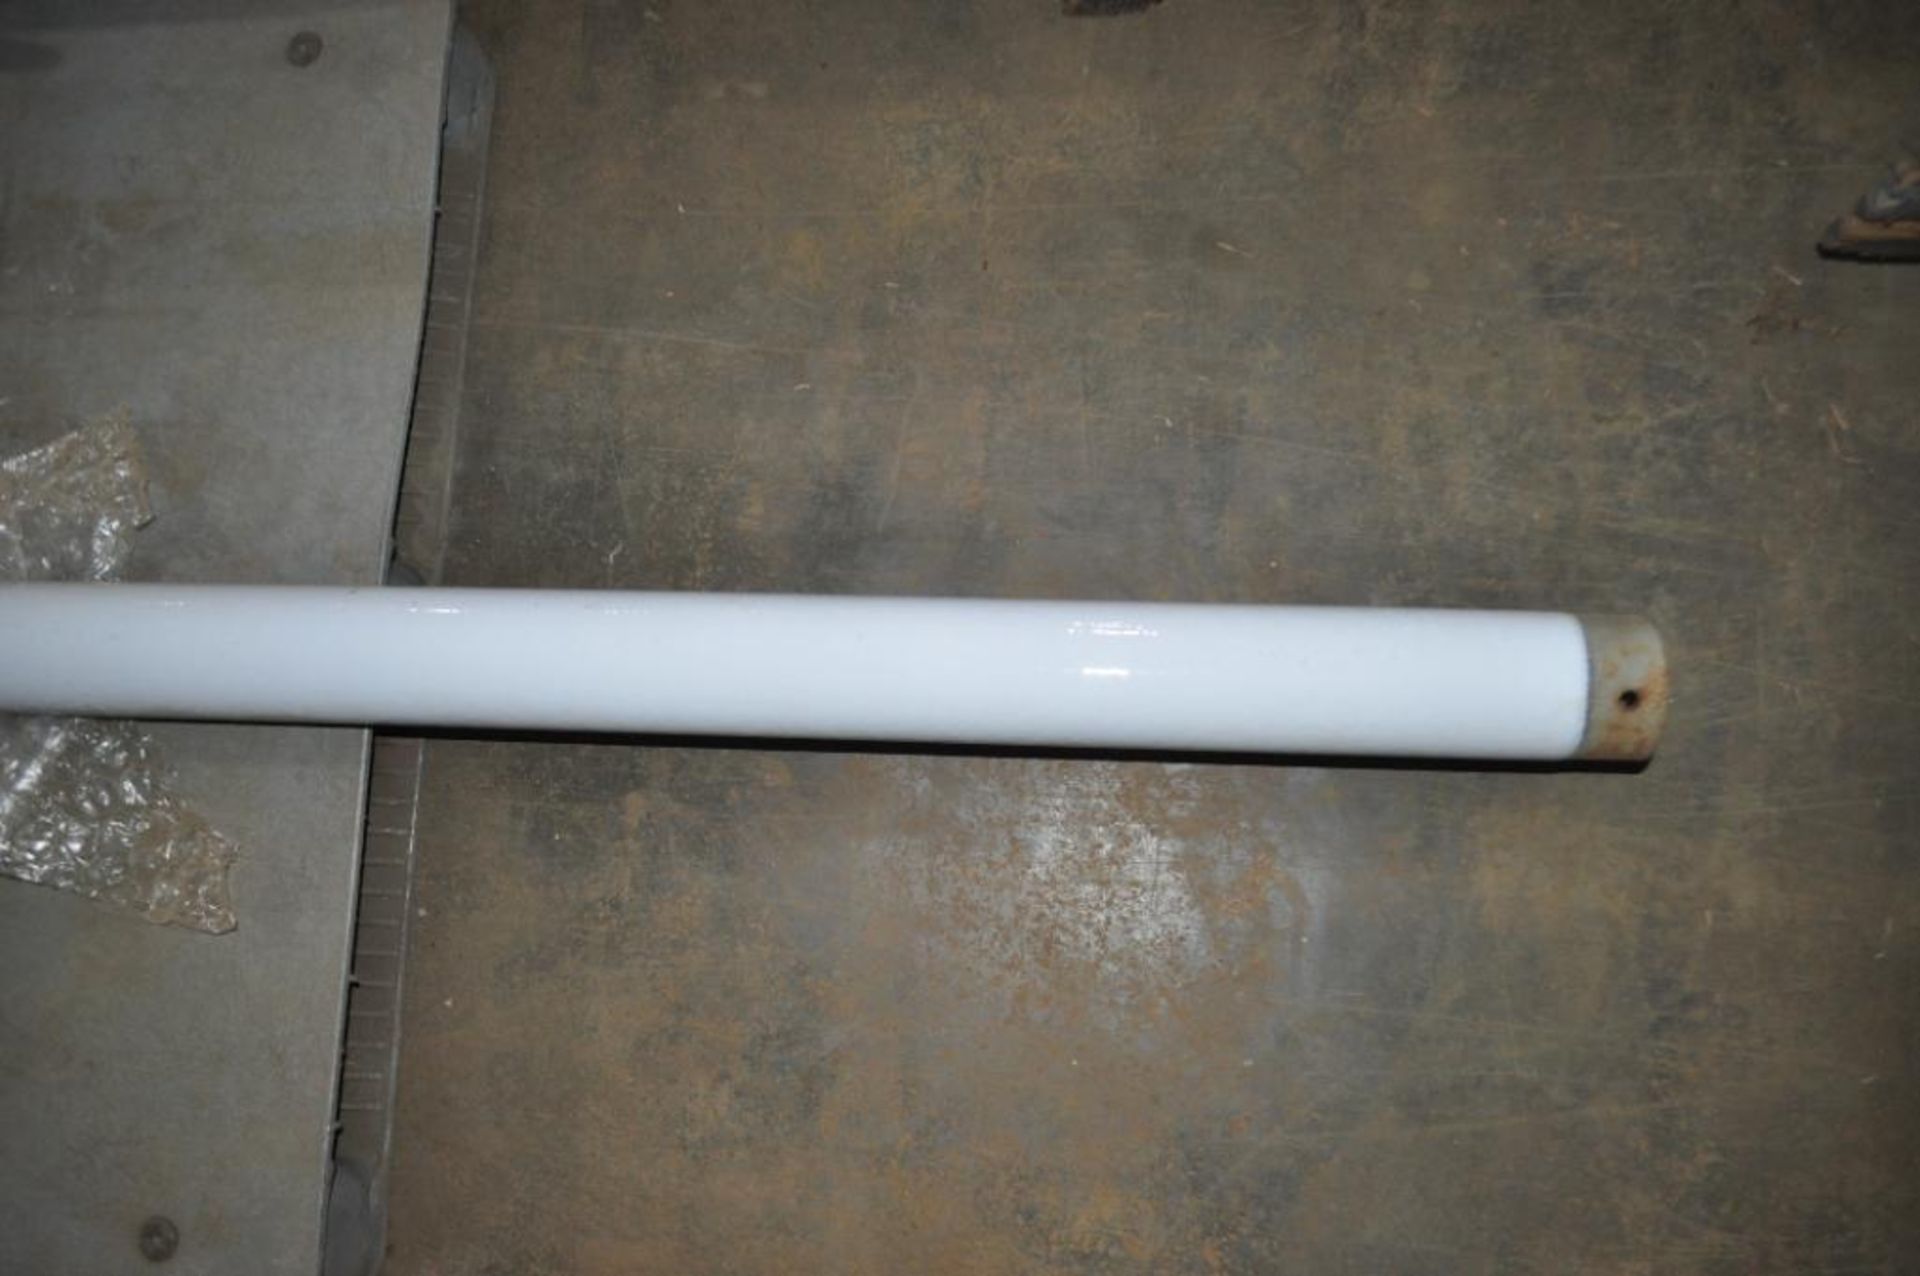 PFAUDLER/DIE DIETRICH GLASS LINED 3-FINGER BAFFLE, LENGTH: 112'', DIAMETER OF SHAFT: 3'', NEW - Image 3 of 4